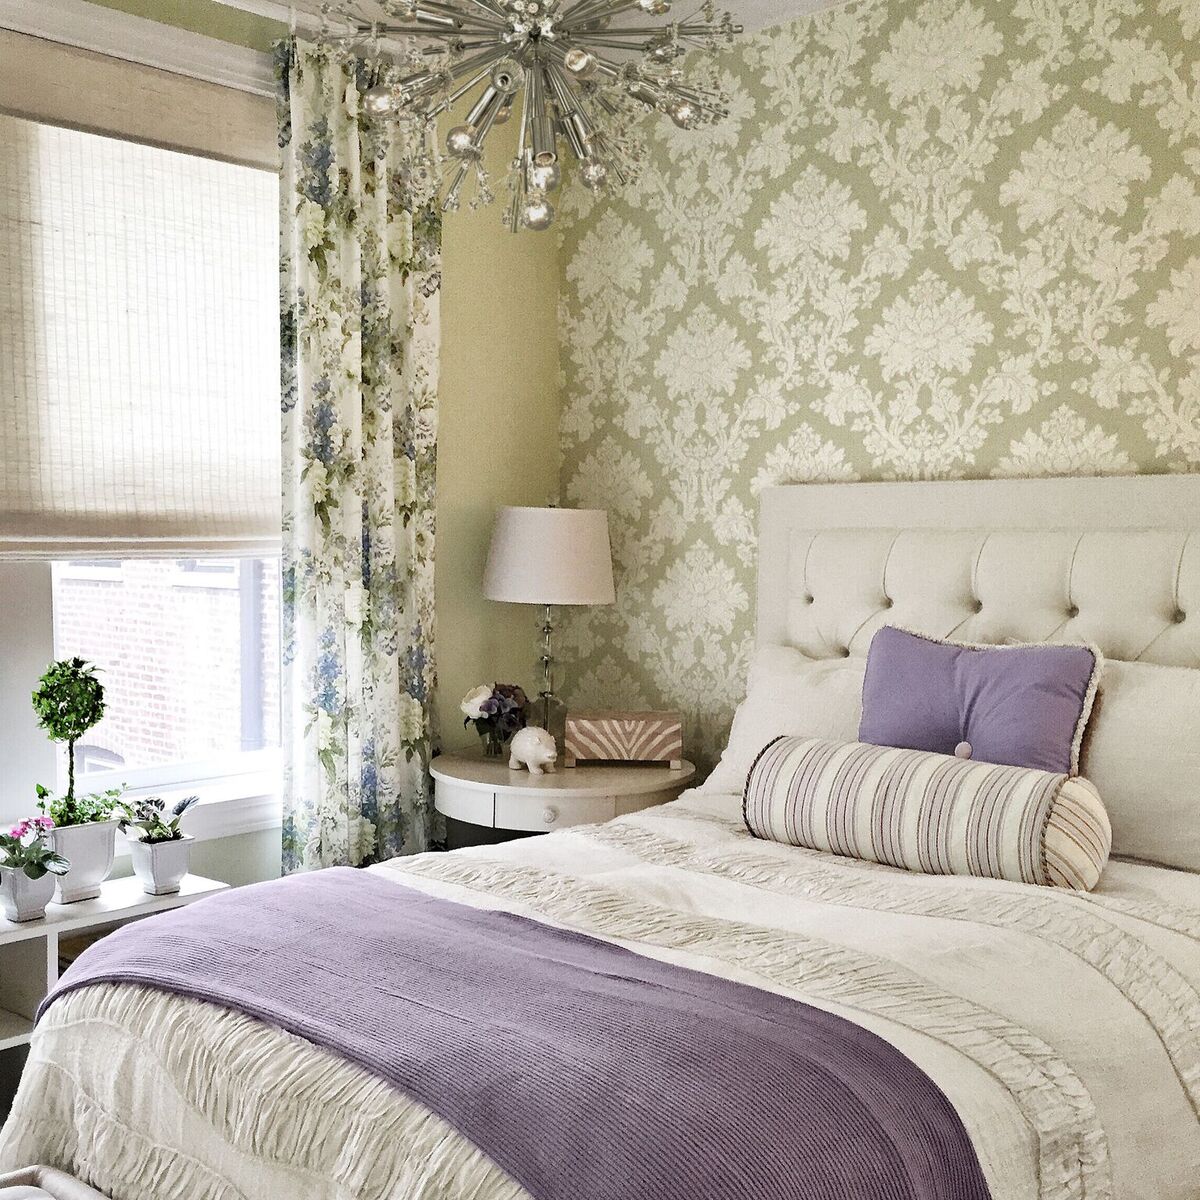 Projects-Princess-in-the-Garden-Girls-Bedroom_preview.jpg